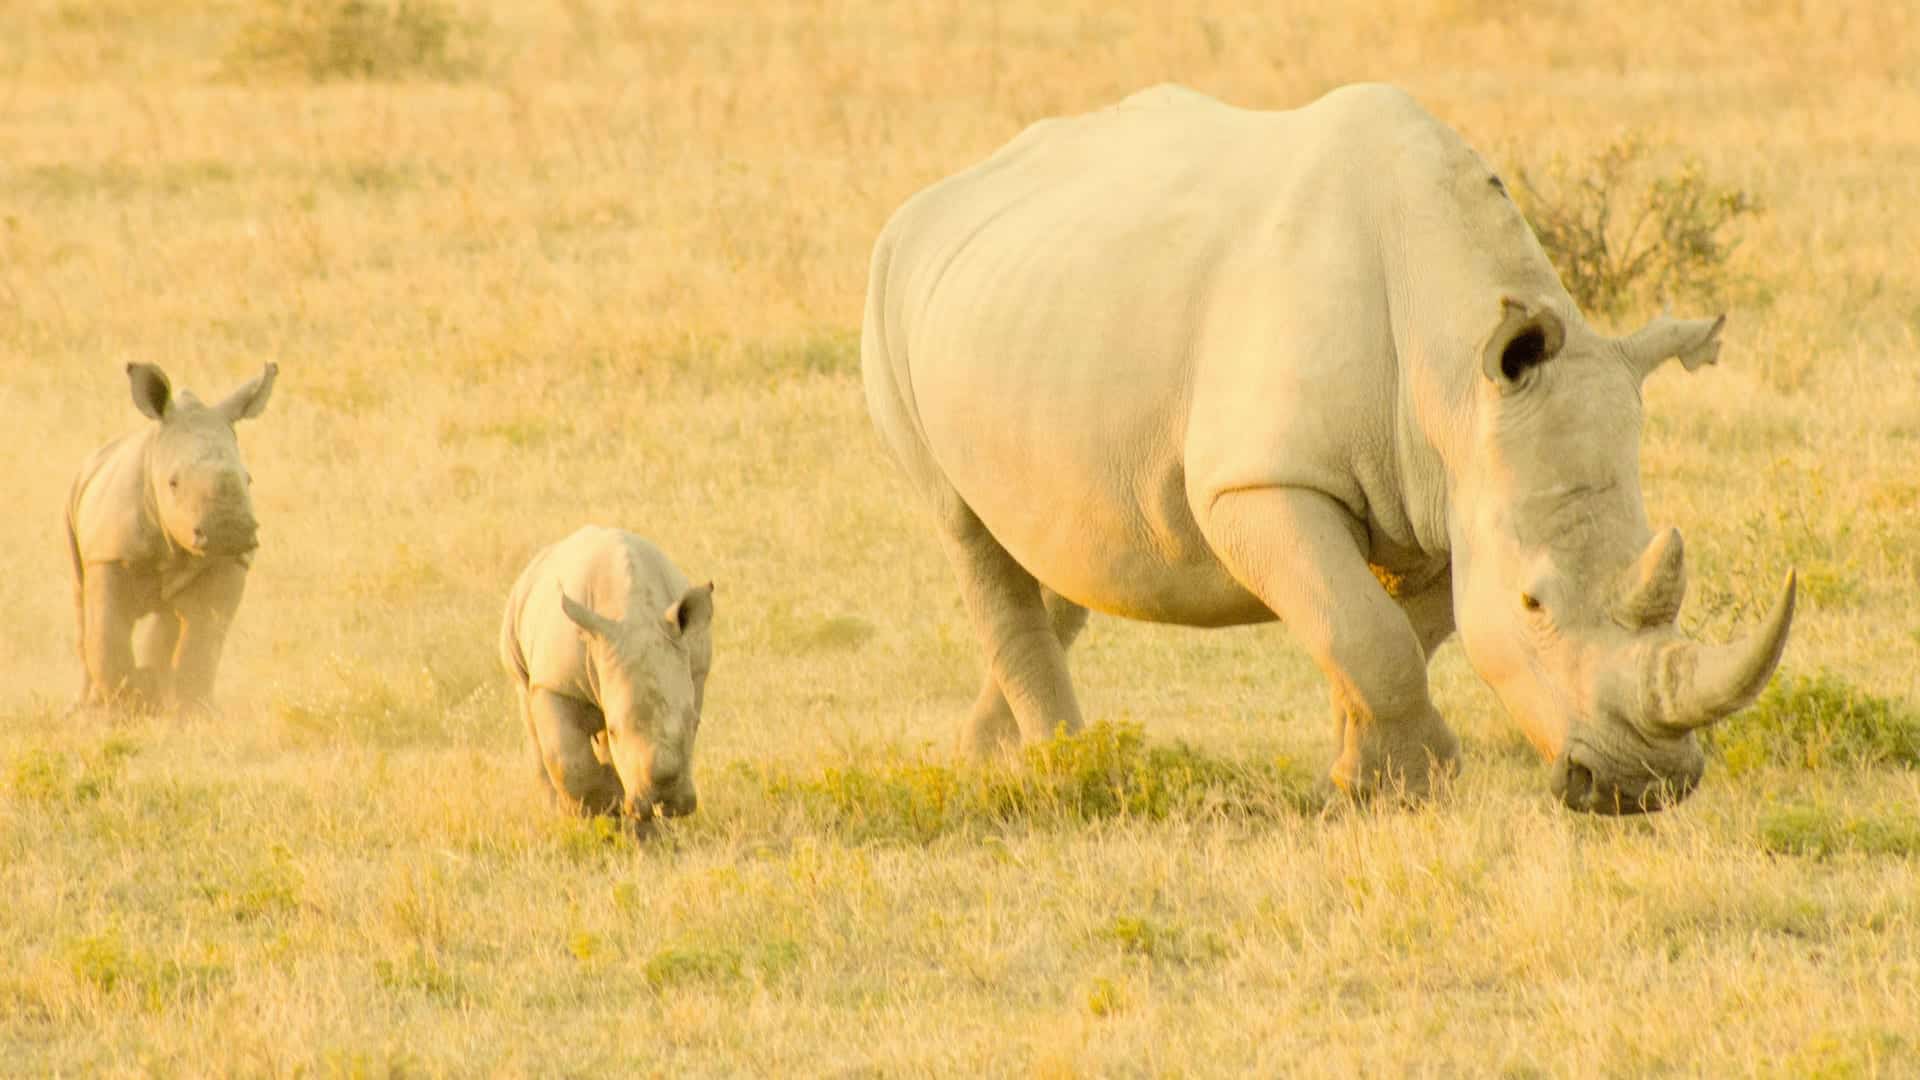 Rhino with two calves